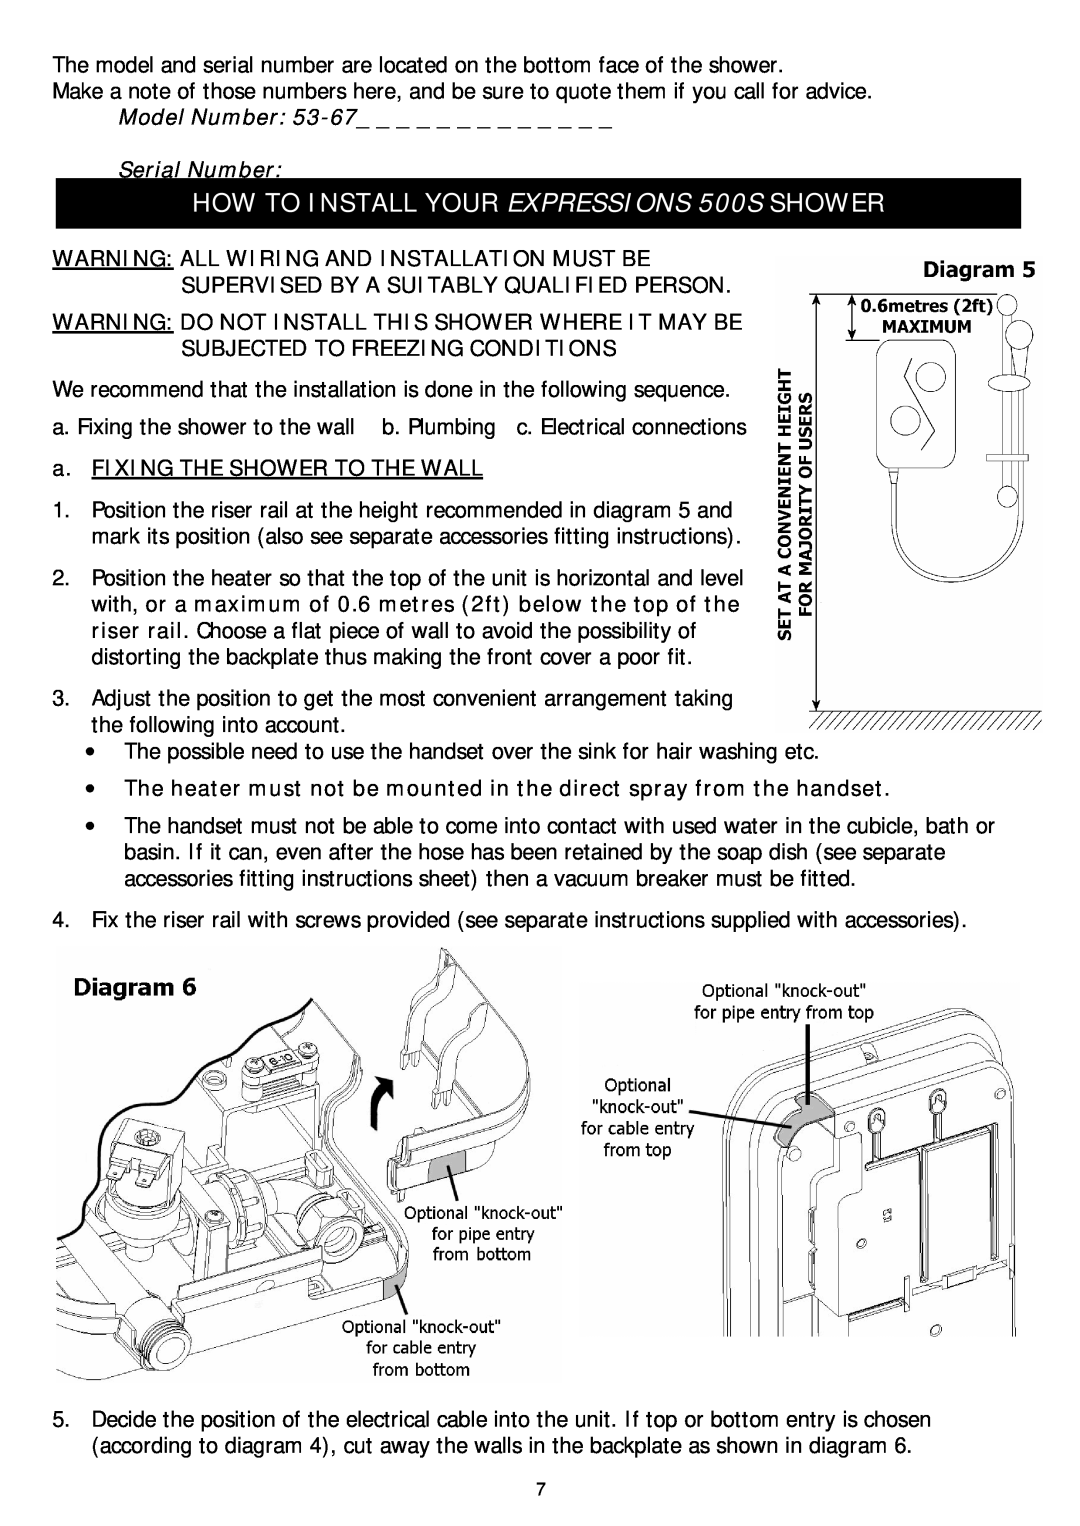 Redring manual HOW TO INSTALL YOUR EXPRESSIONS 500S SHOWER, Warning All Wiring And Installation Must Be 